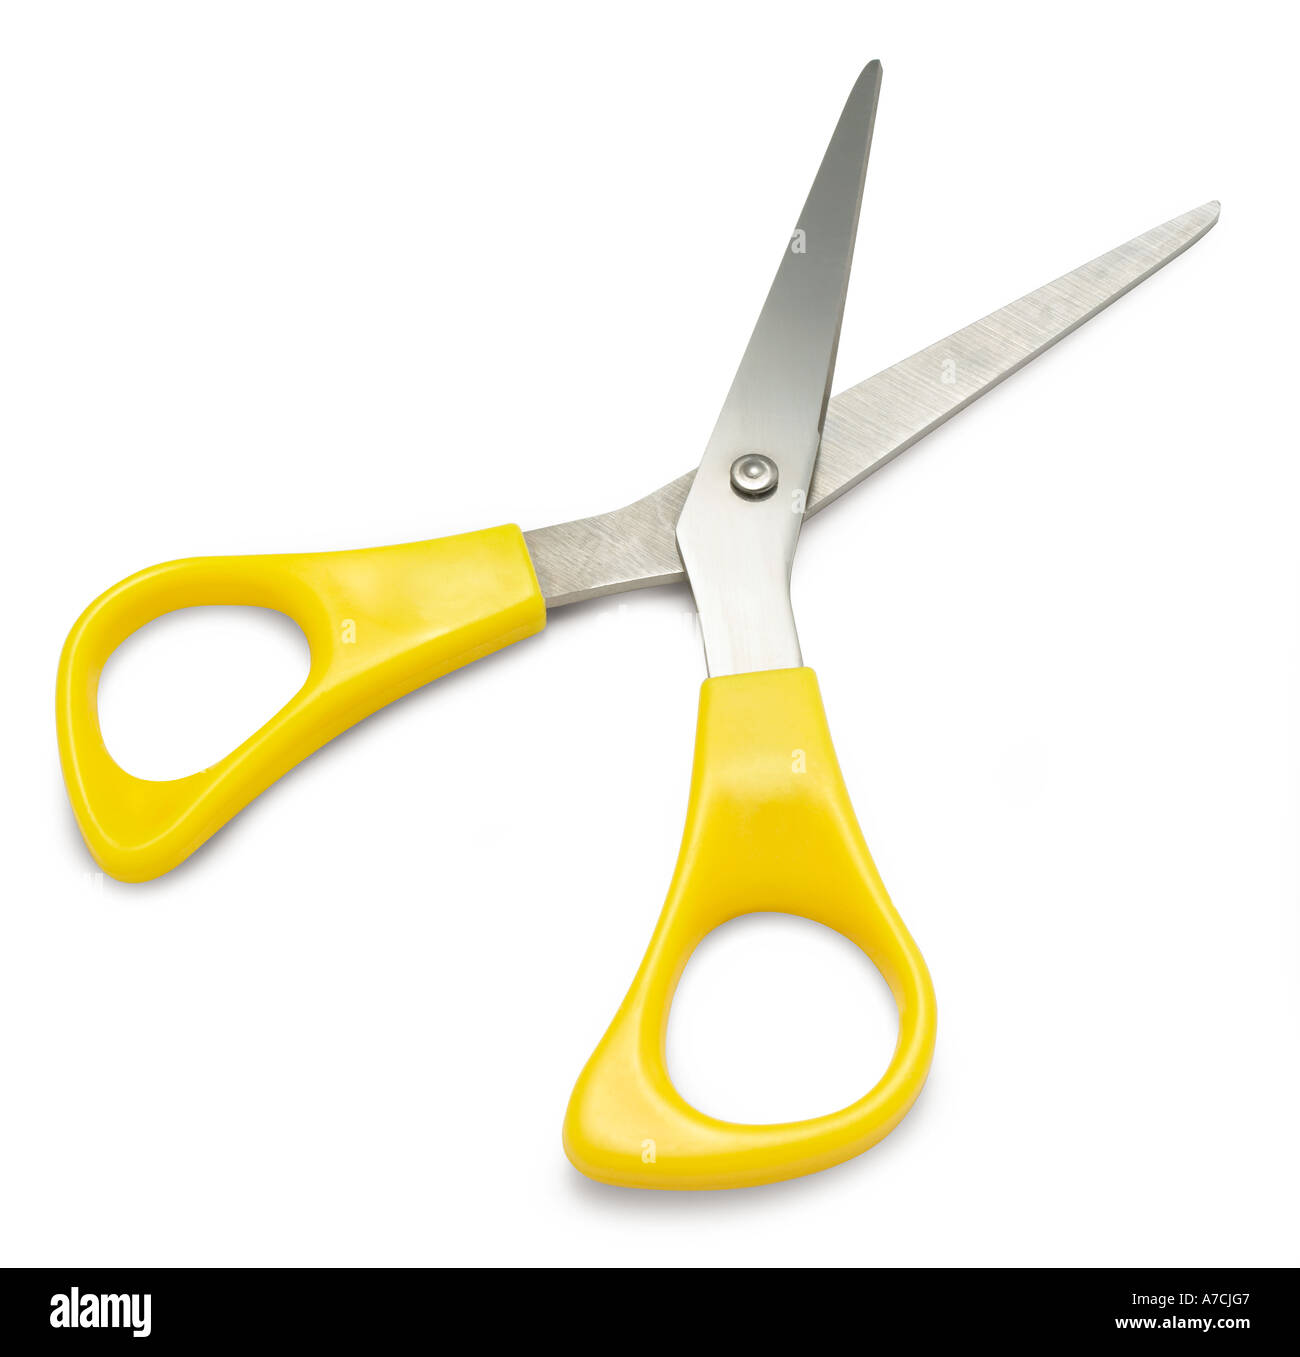 Pair of scissors cut out on white background Stock Photo